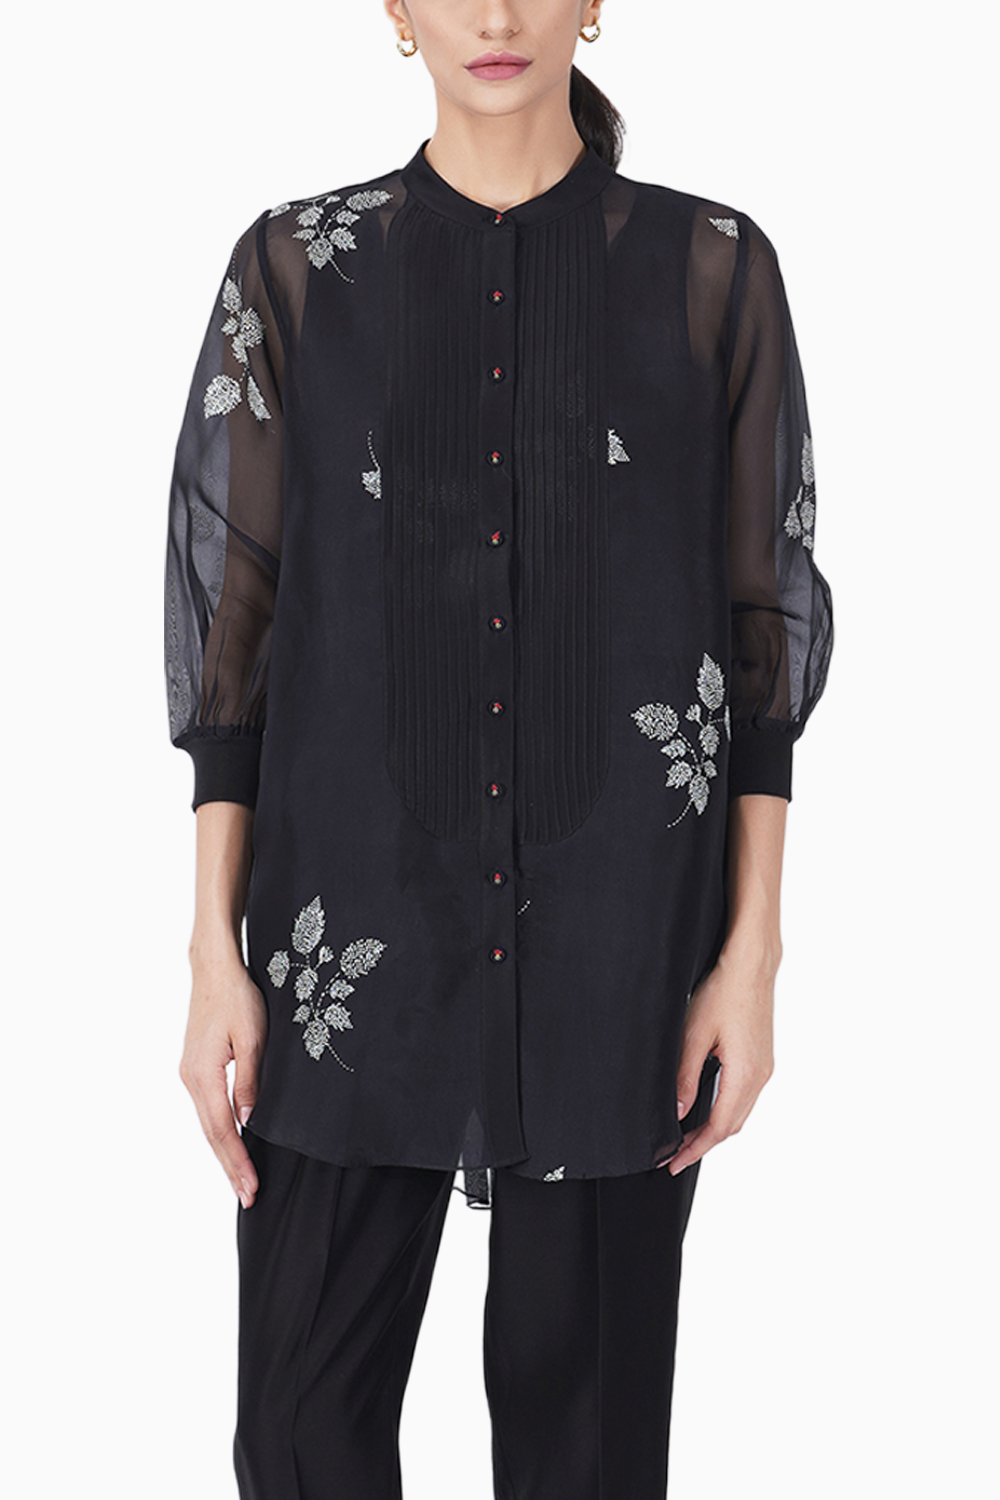 Black Leaf Print Shirt with Top and Pants